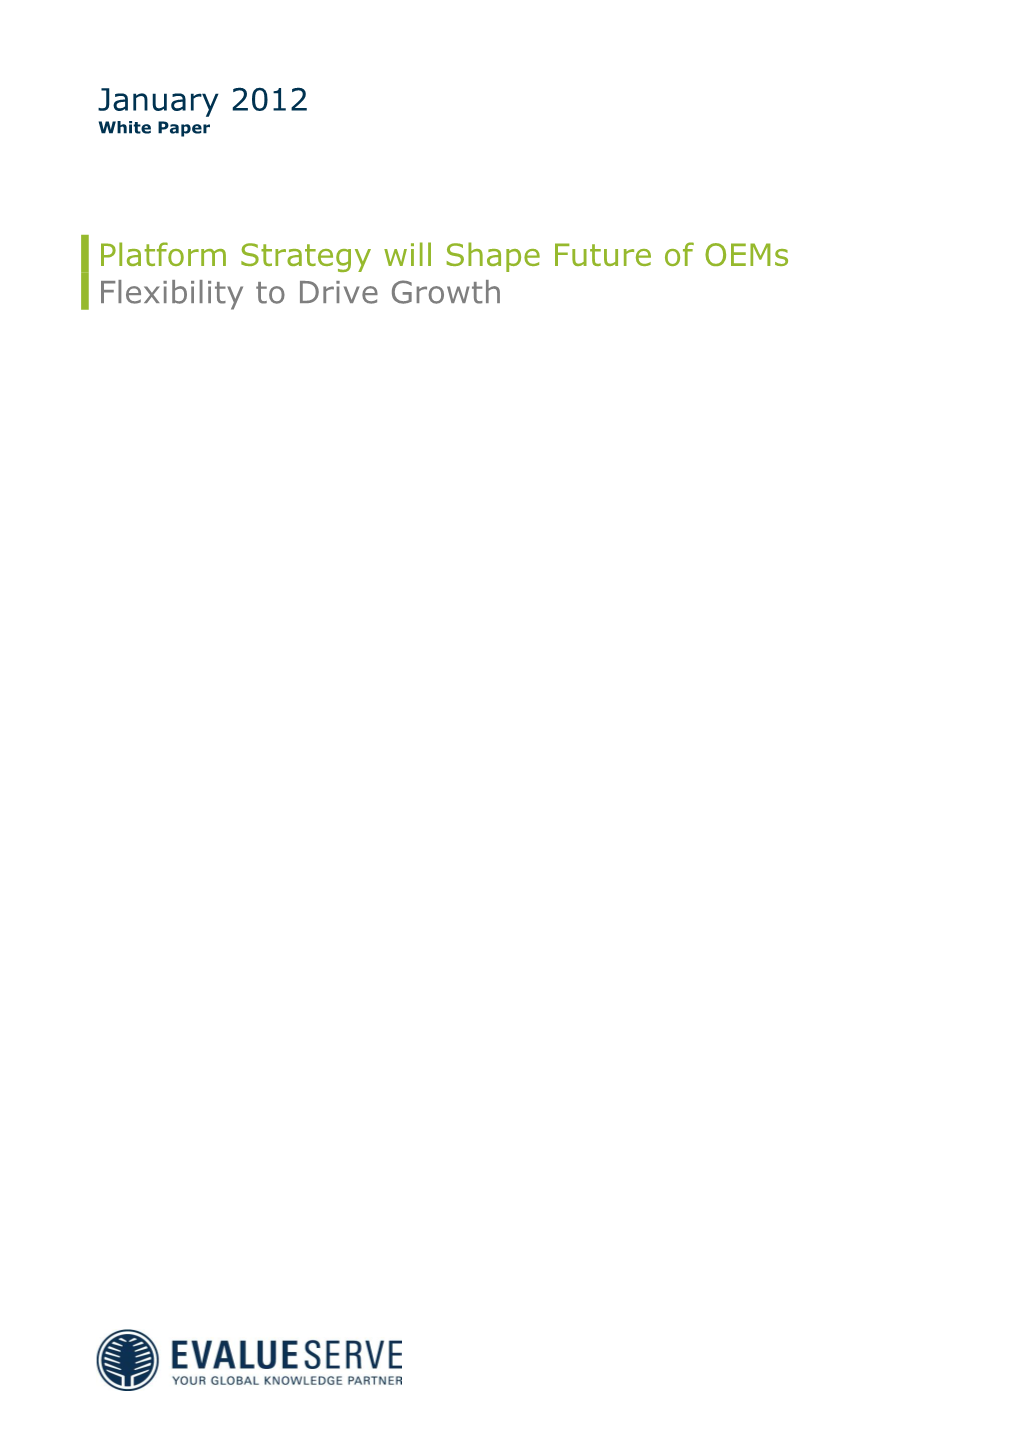 Platform Strategy Will Shape Future of Oems Flexibility to Drive Growth